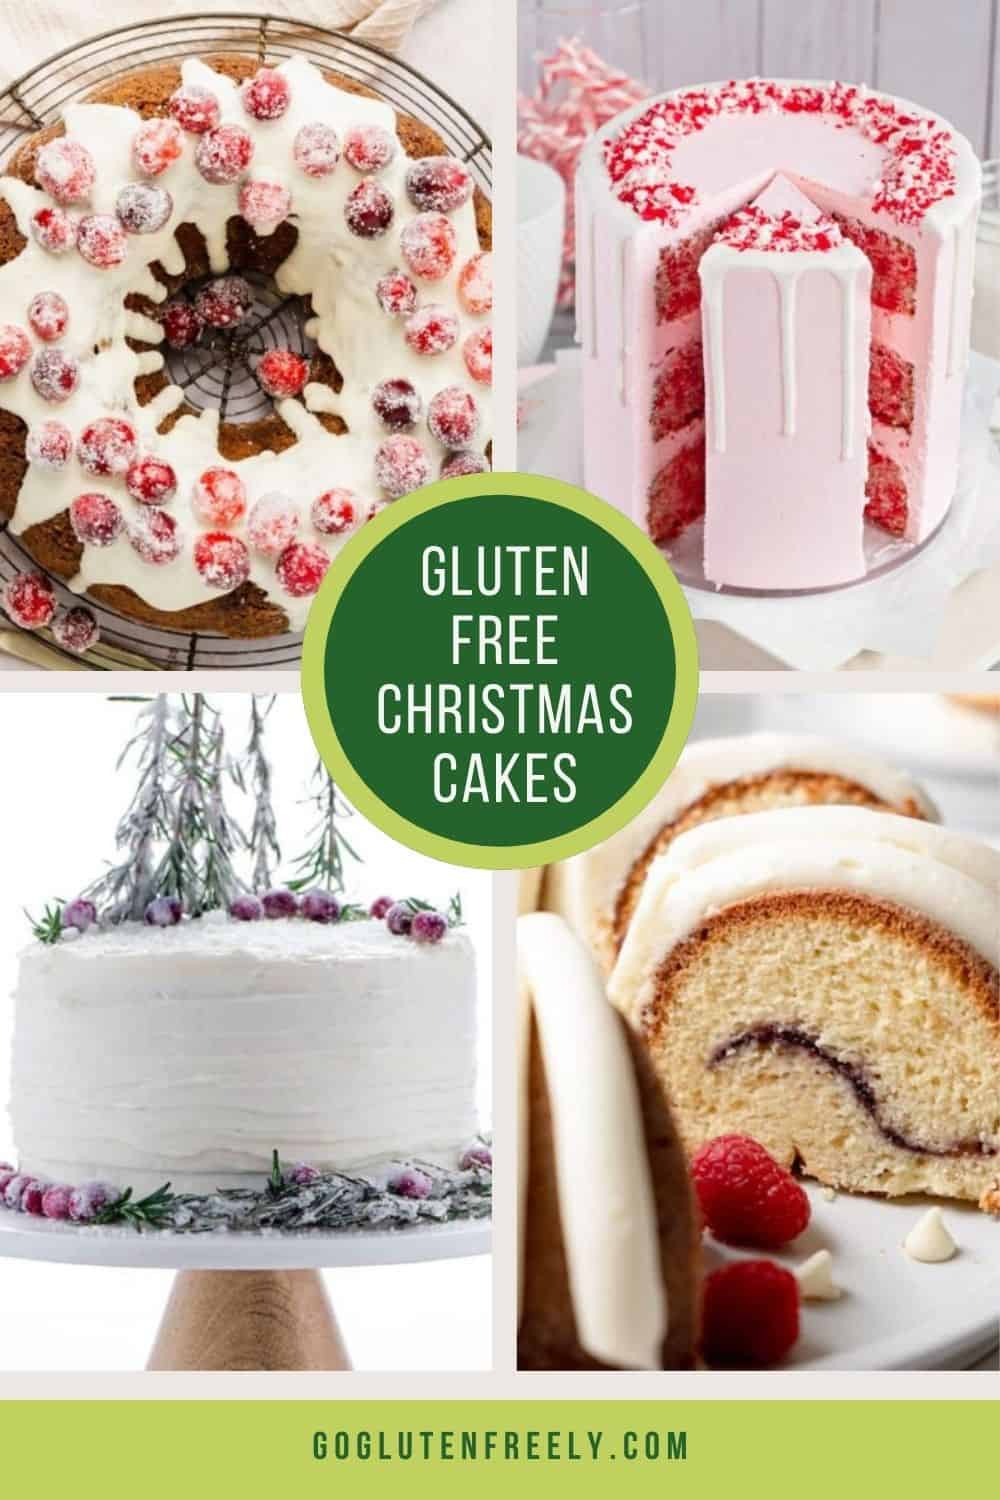 Collage of cakes: gingerbread Bundt Cake, peppermint layered cake, raspberry swirl Bundt Cake, and cake with white frosting and rosemary sprigs and cranberries. Green circle and white text in the center: Gluten-Free Christmas Cakes.